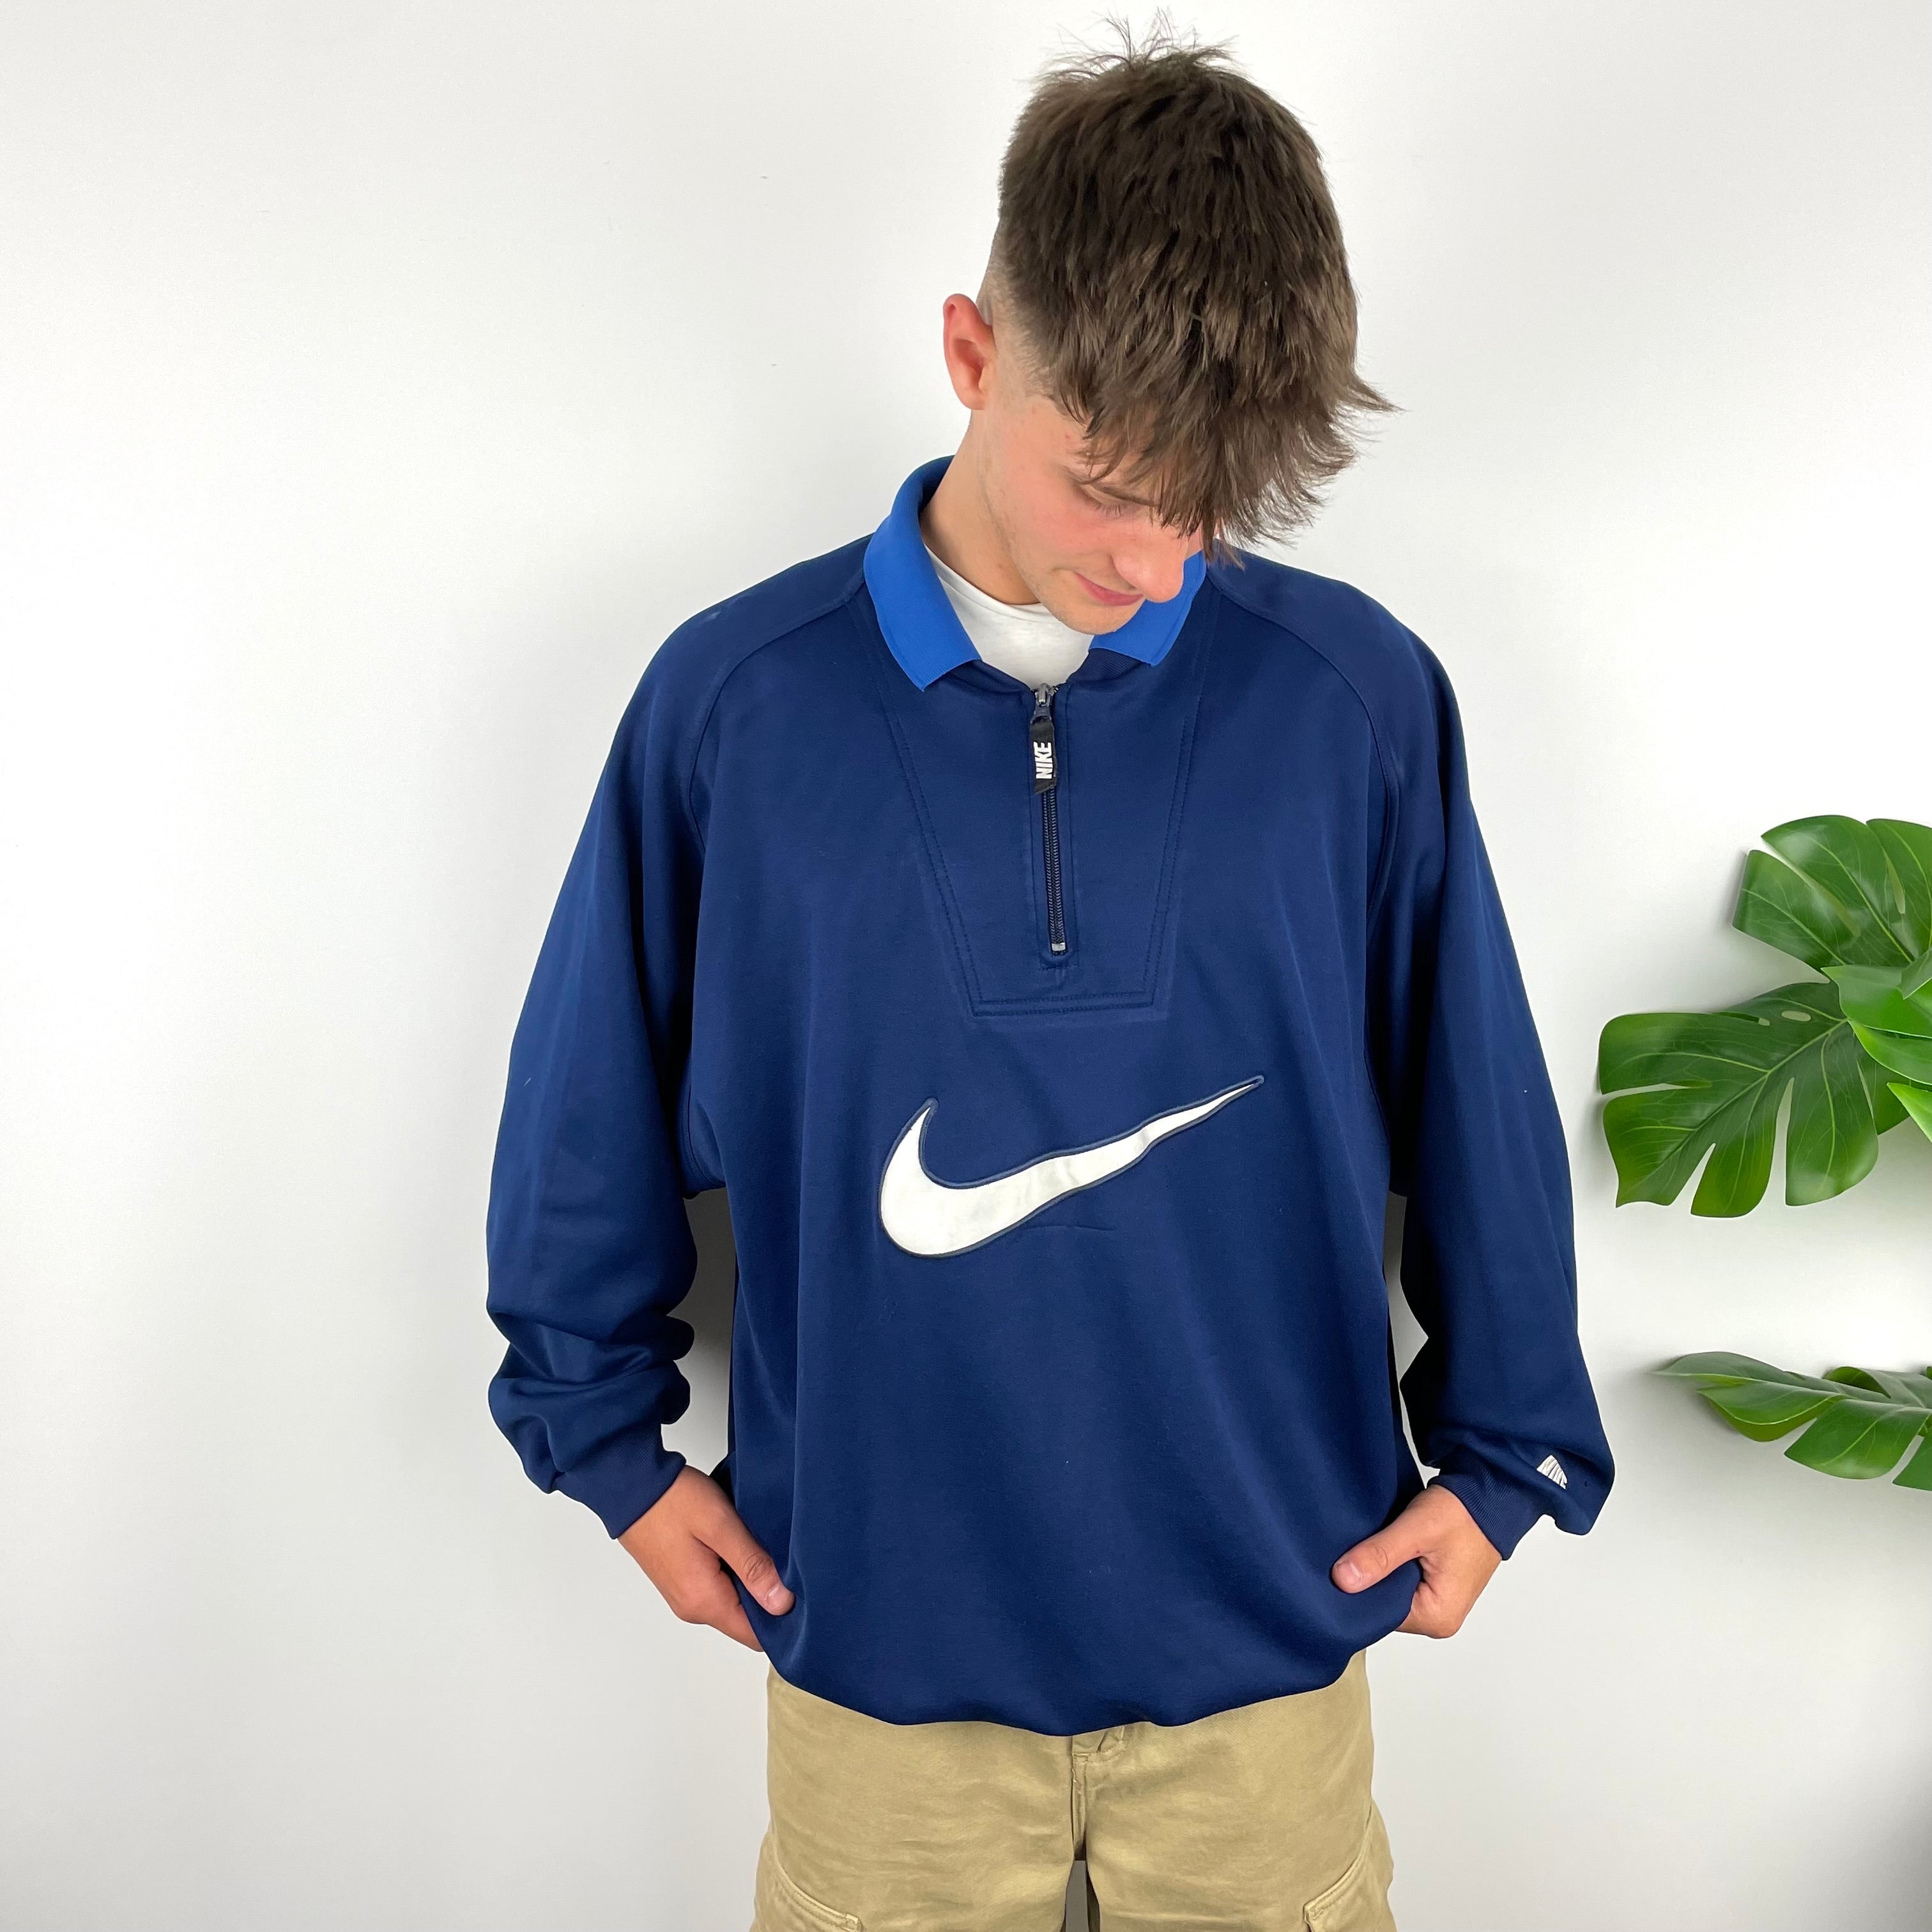 Nike RARE Navy Embroidered Spell Out Quarter Zip Sweatshirt (XXL)